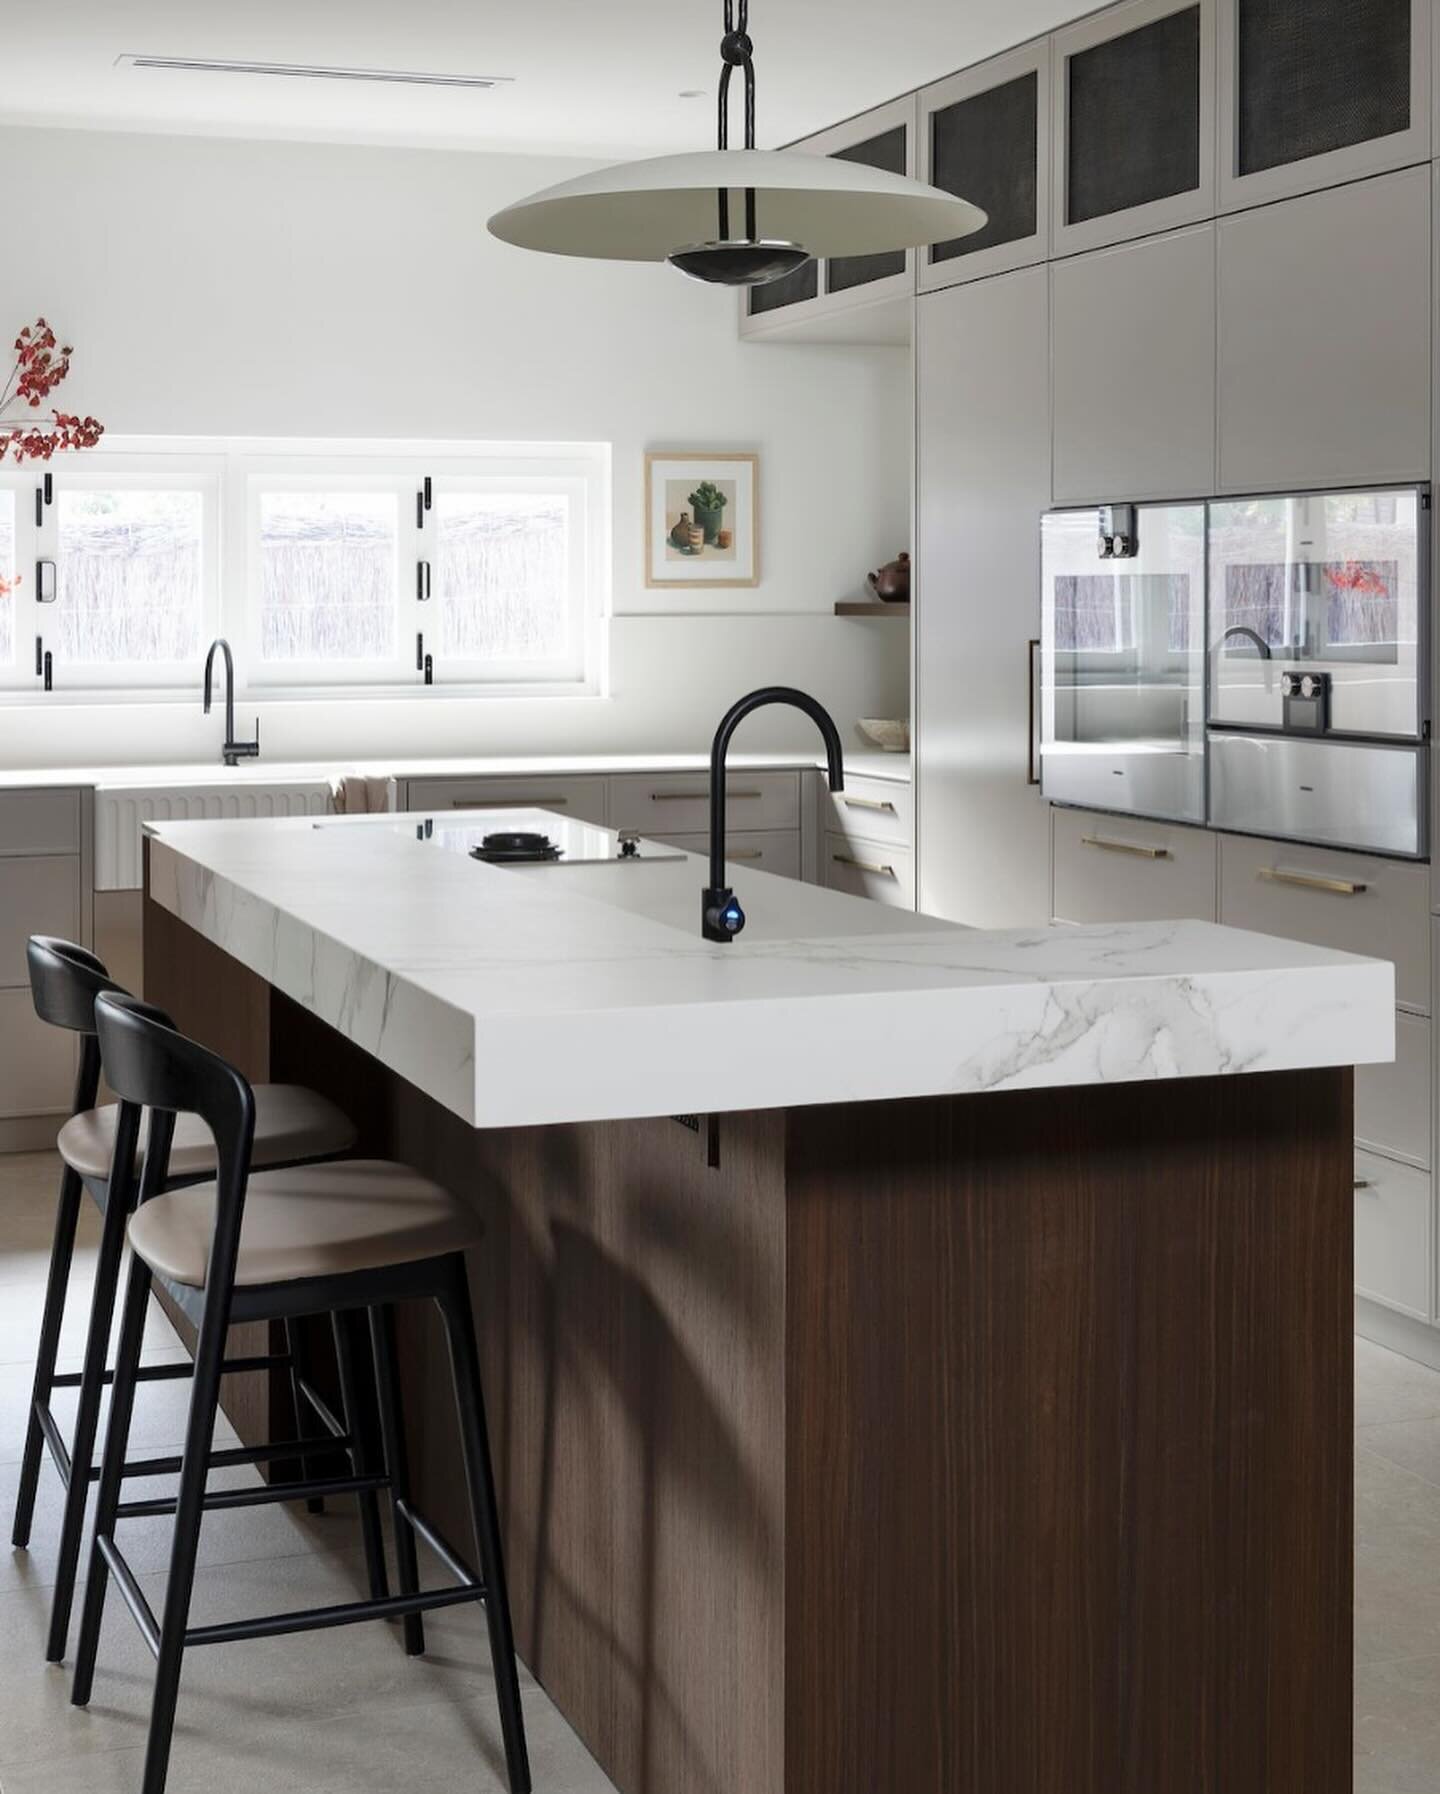 A kitchen must stand the test of time, says Attila Roka from The Kitchen Studio IQ. Case in point: his timeless East Fremantle kitchen project. Reimagining an old kitchen in its original space, he successfully conjured up a new contemporary version t